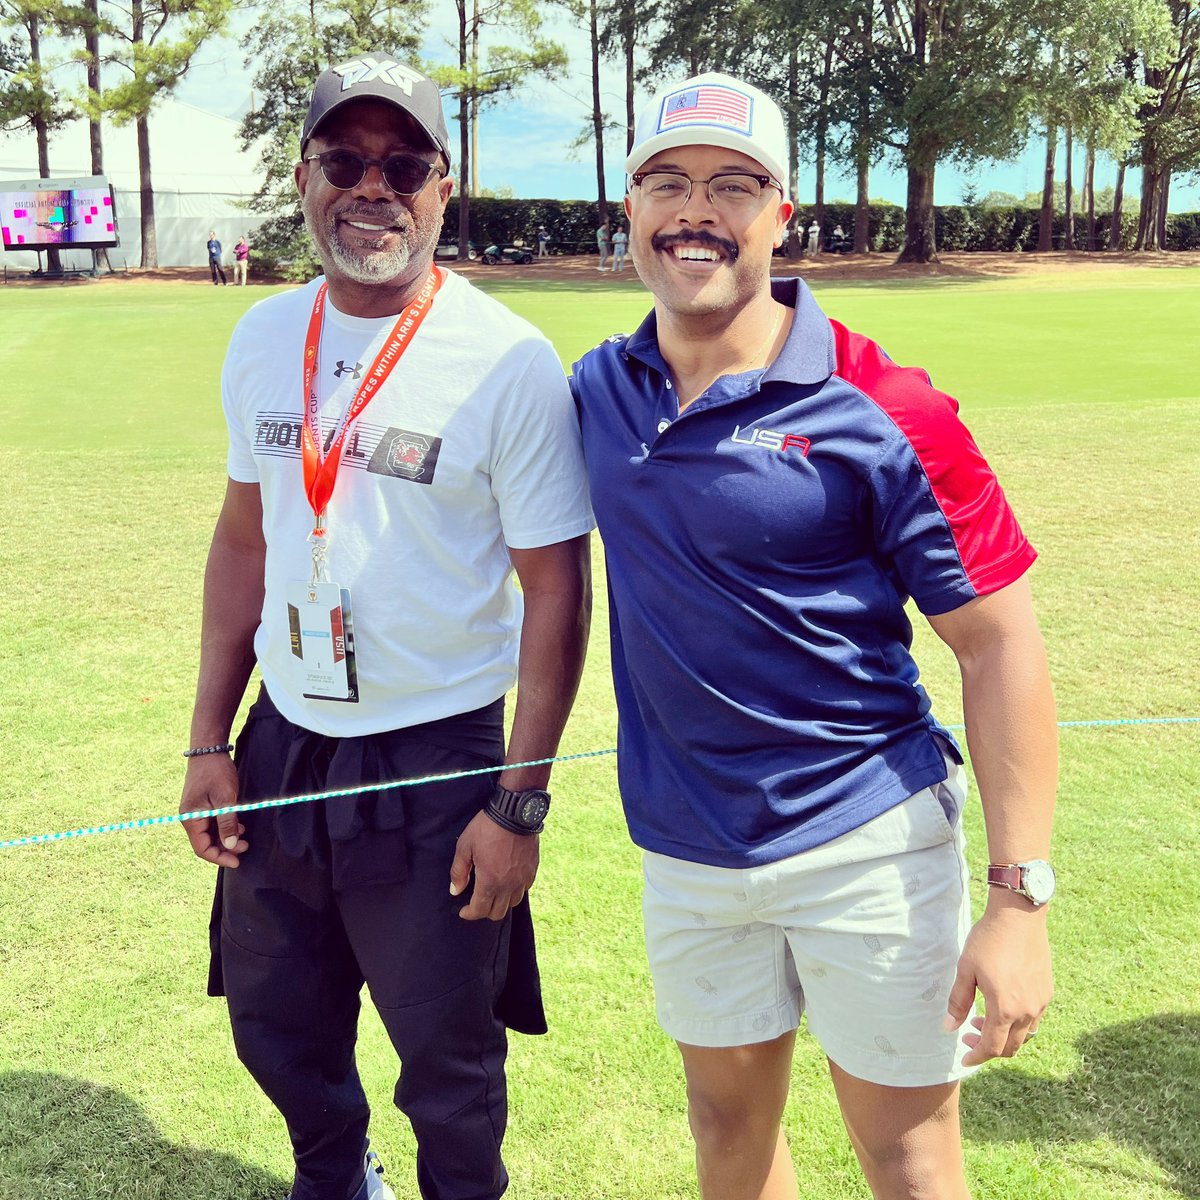 Since the @PGATOUR is at Quail Hollow for the @WellsFargoGolf in Charlotte, throwback to me meeting @dariusrucker at @PresidentsCup 
#BeersAndSunshine